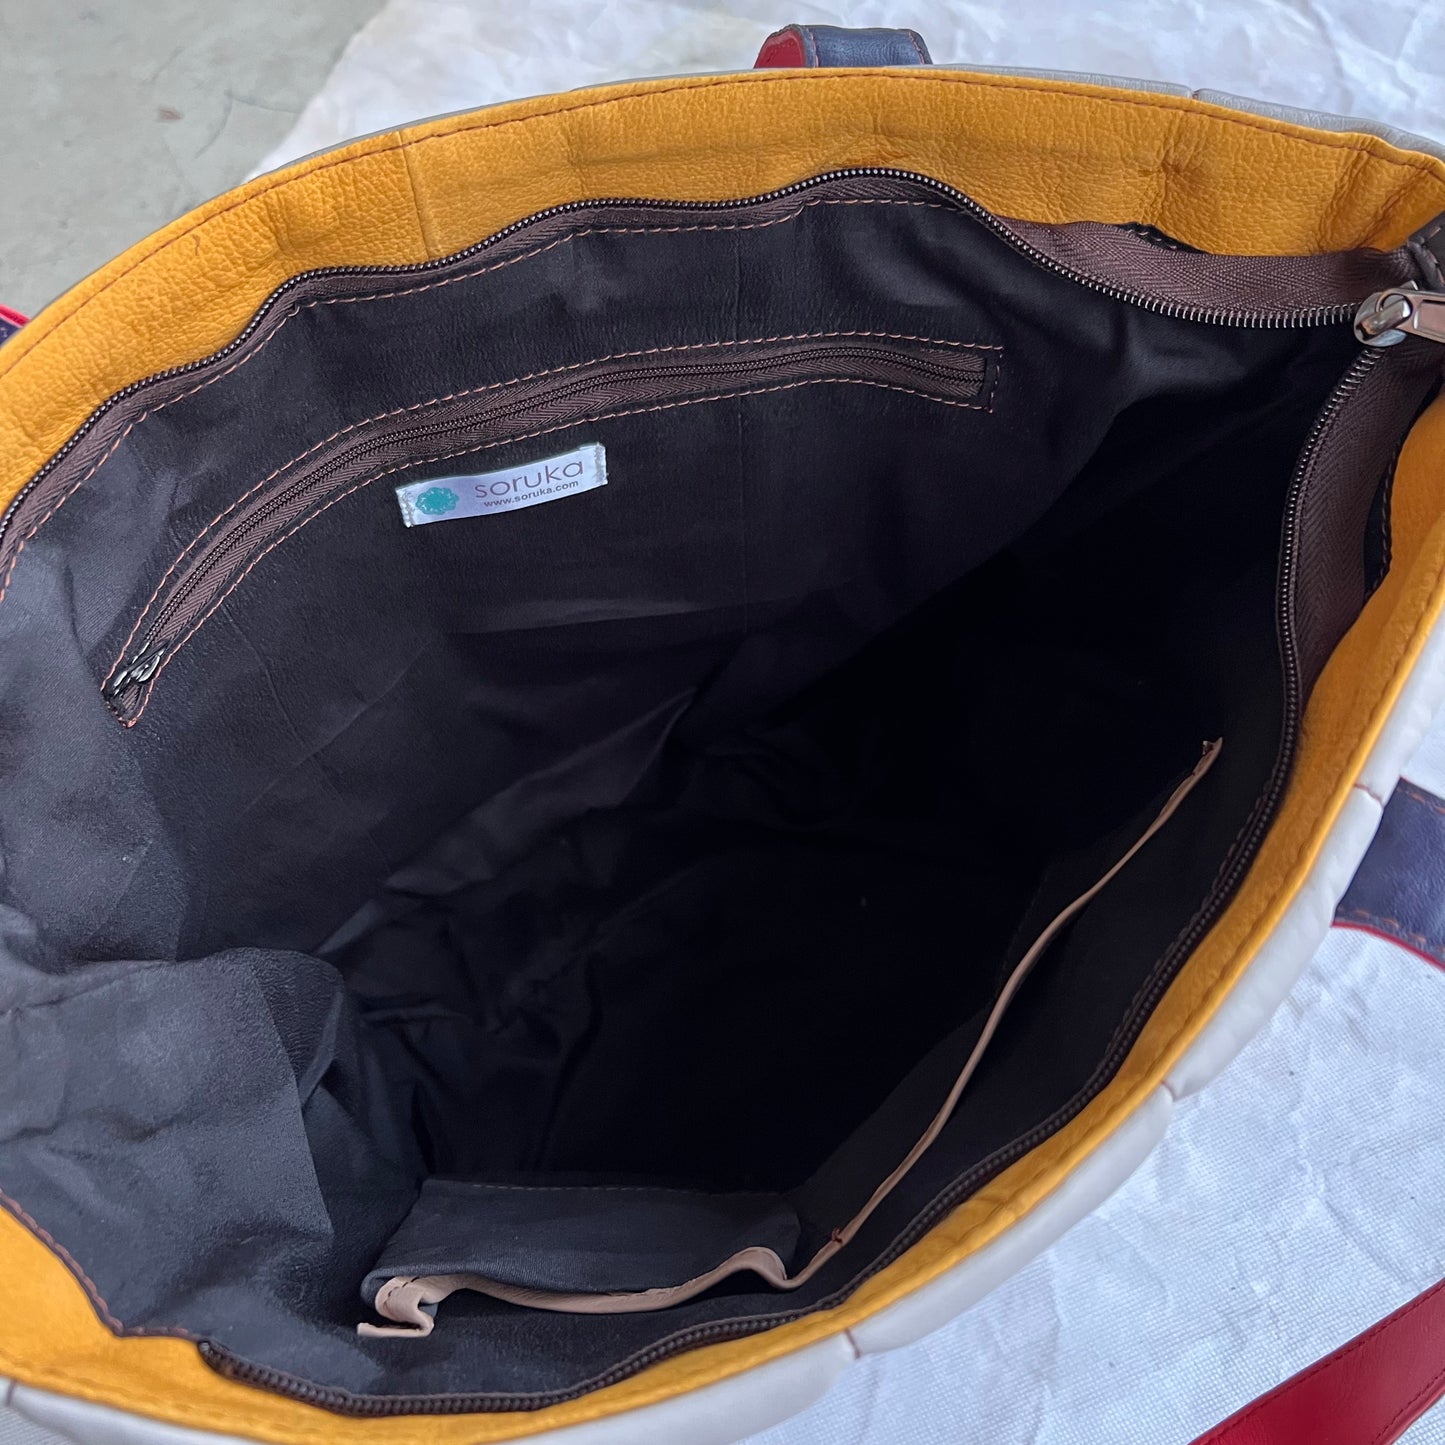 interior view of tote showing black lining and slip and zippered pockets.